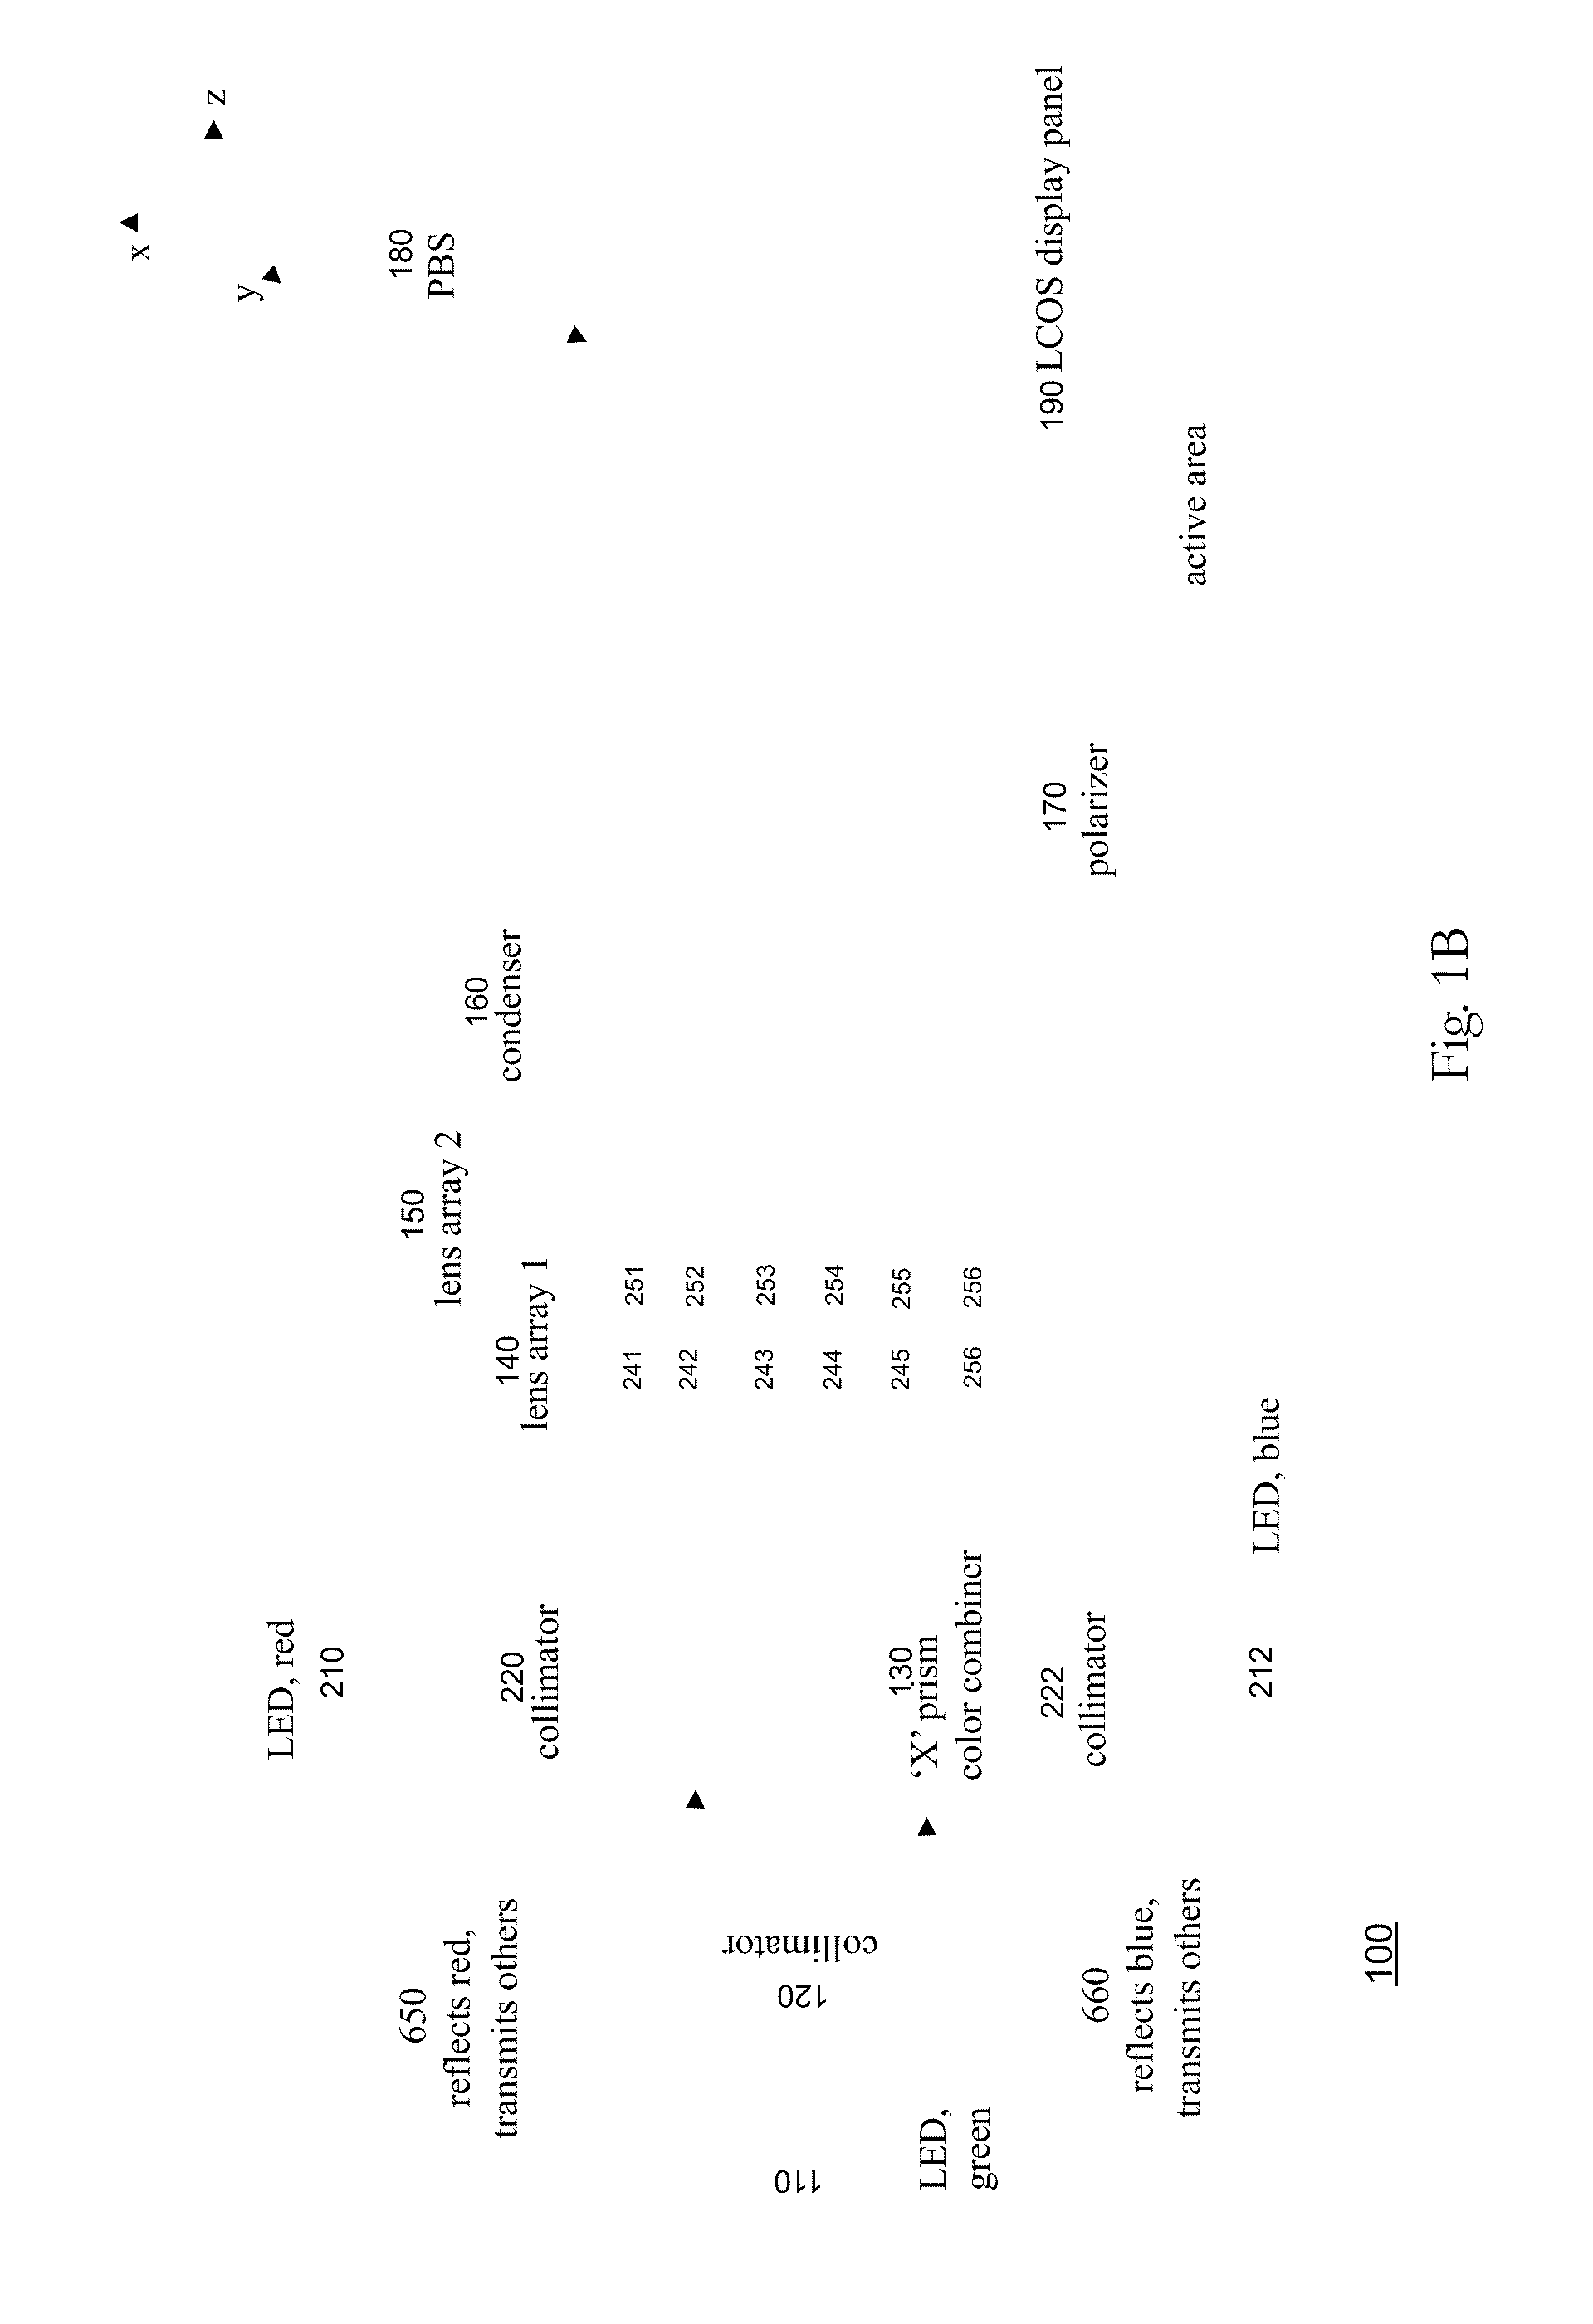 Systems and methods for handheld projection displays